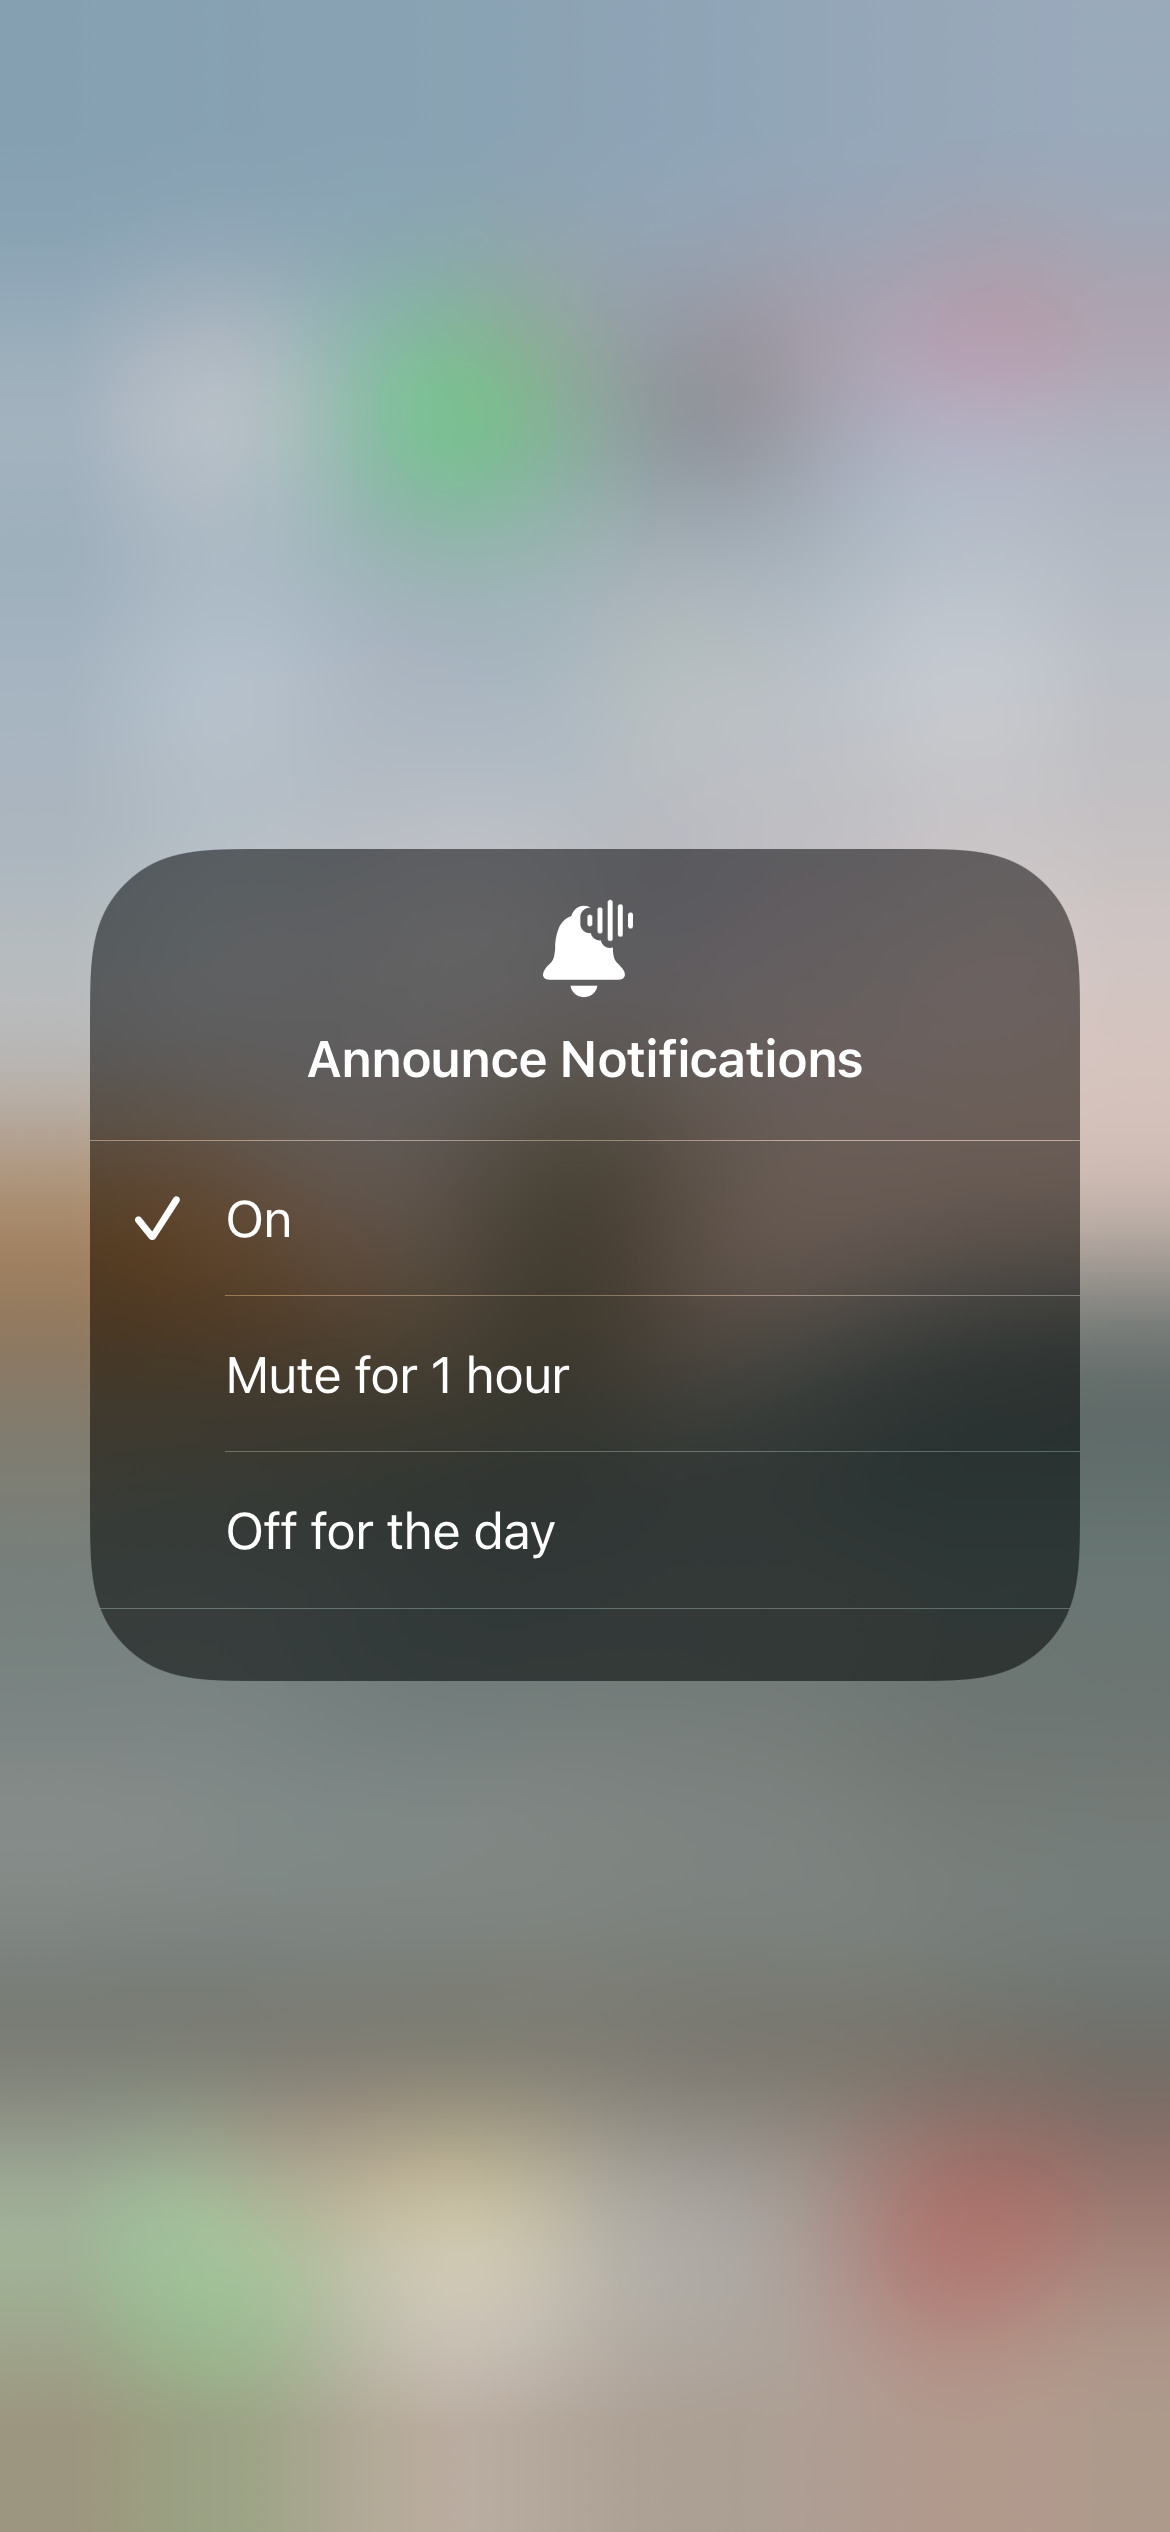 Announce Notification Options